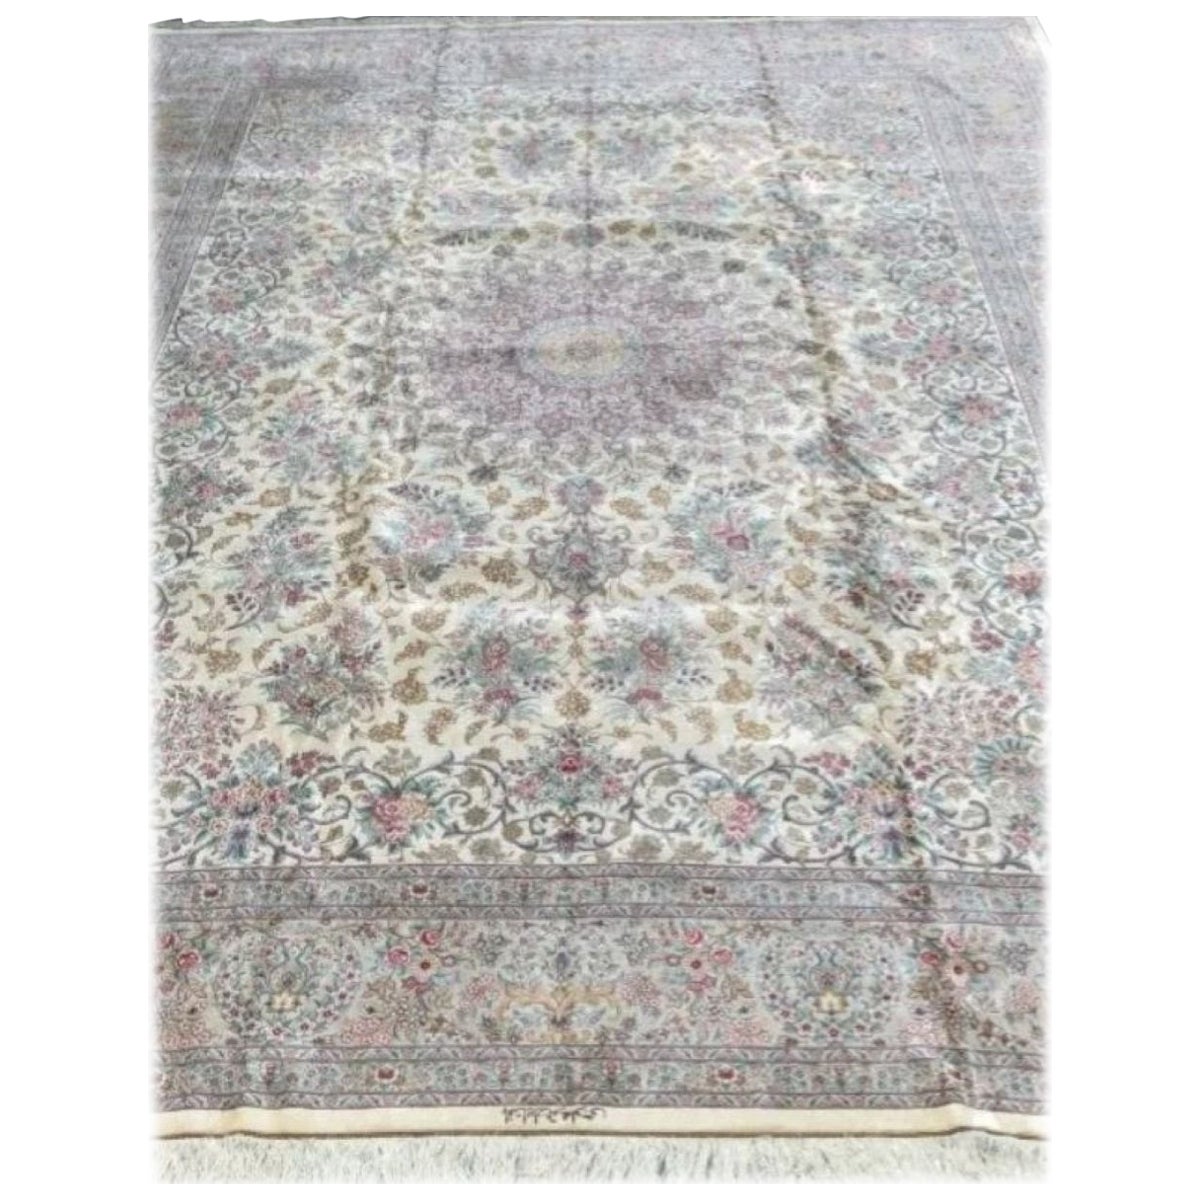 Magnificent Persian pure silk Qum with silk foundation. This rug has approximately 700 knots per sq inch with a total of 16,000,000 knots tied by hand one by one. It took 9 years to complete this beautiful piece of art. It is signed by Mahloojie.